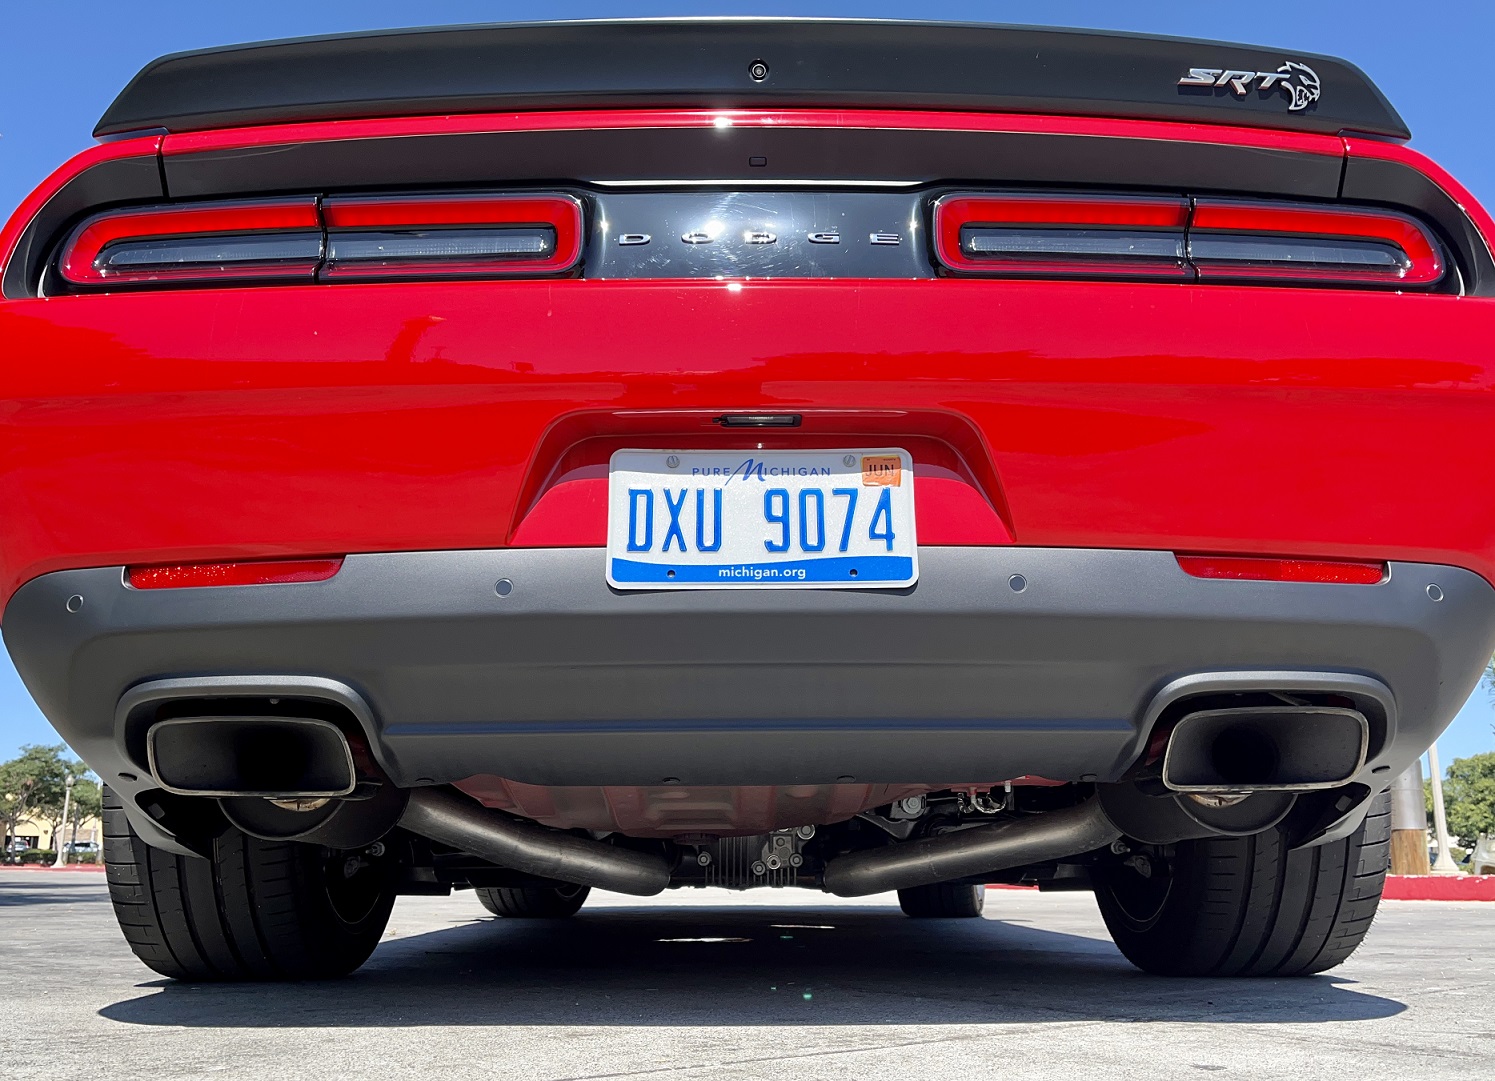 A underbody view of the Challenger exhaust system